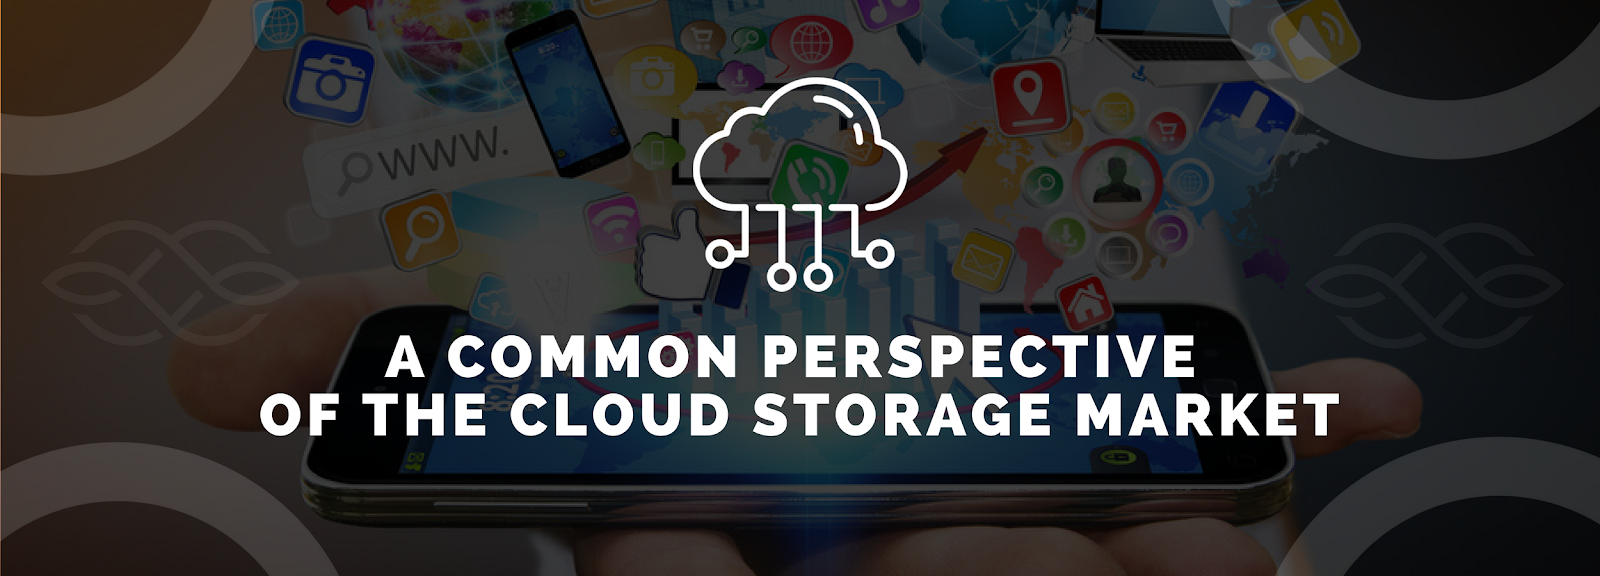 A Common Perspective of the Cloud Storage Market